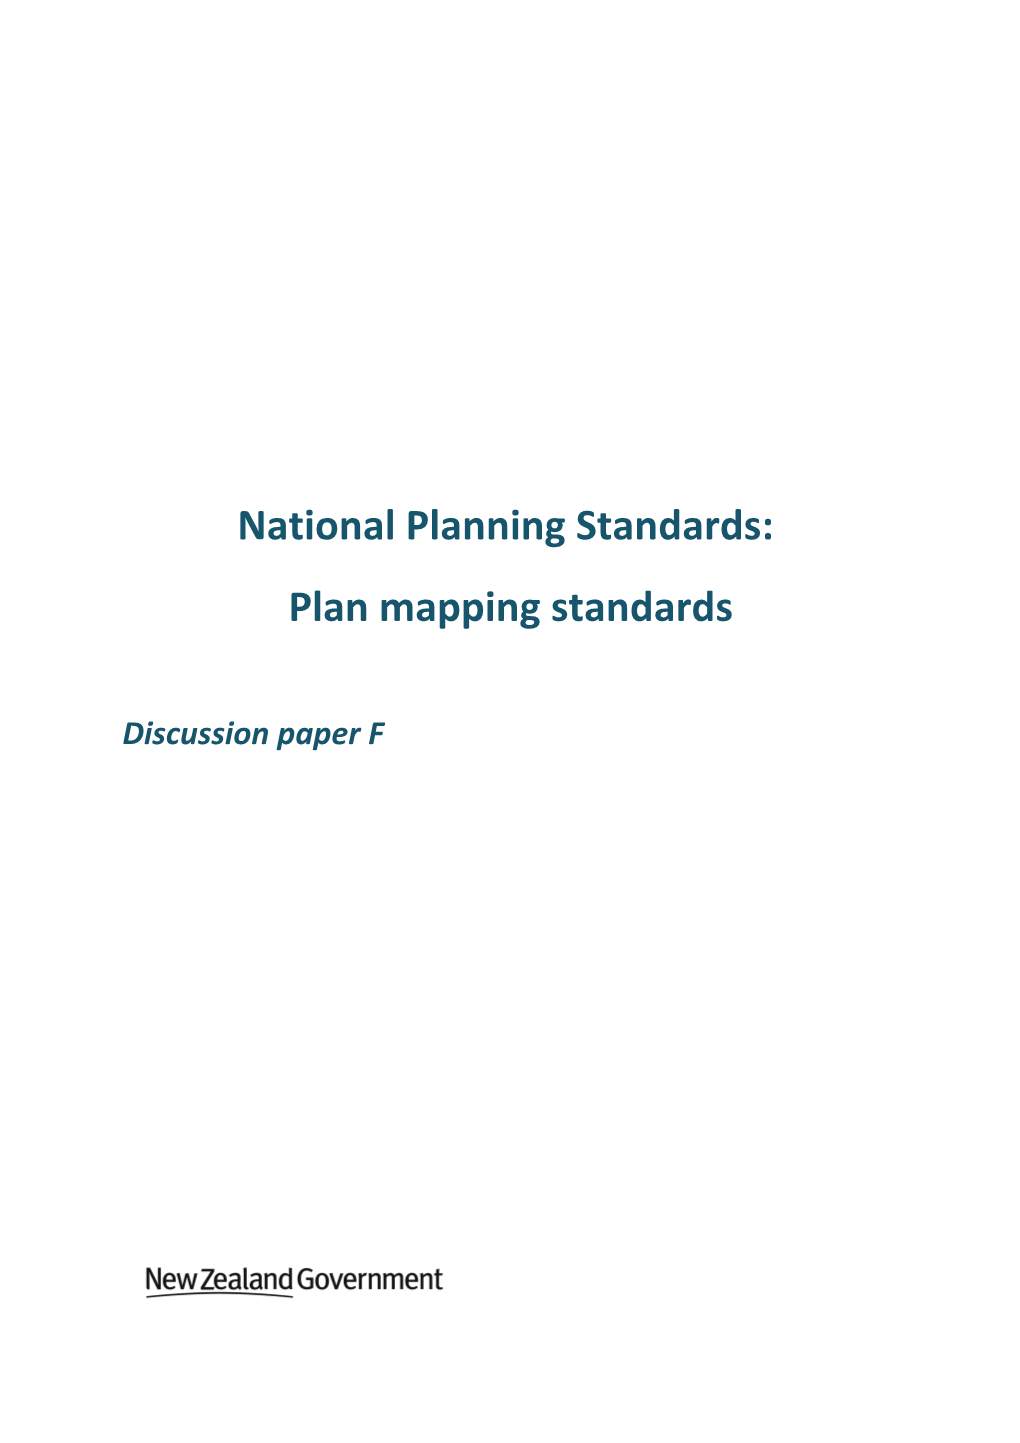 National Planning Standards: Plan Mapping Standards